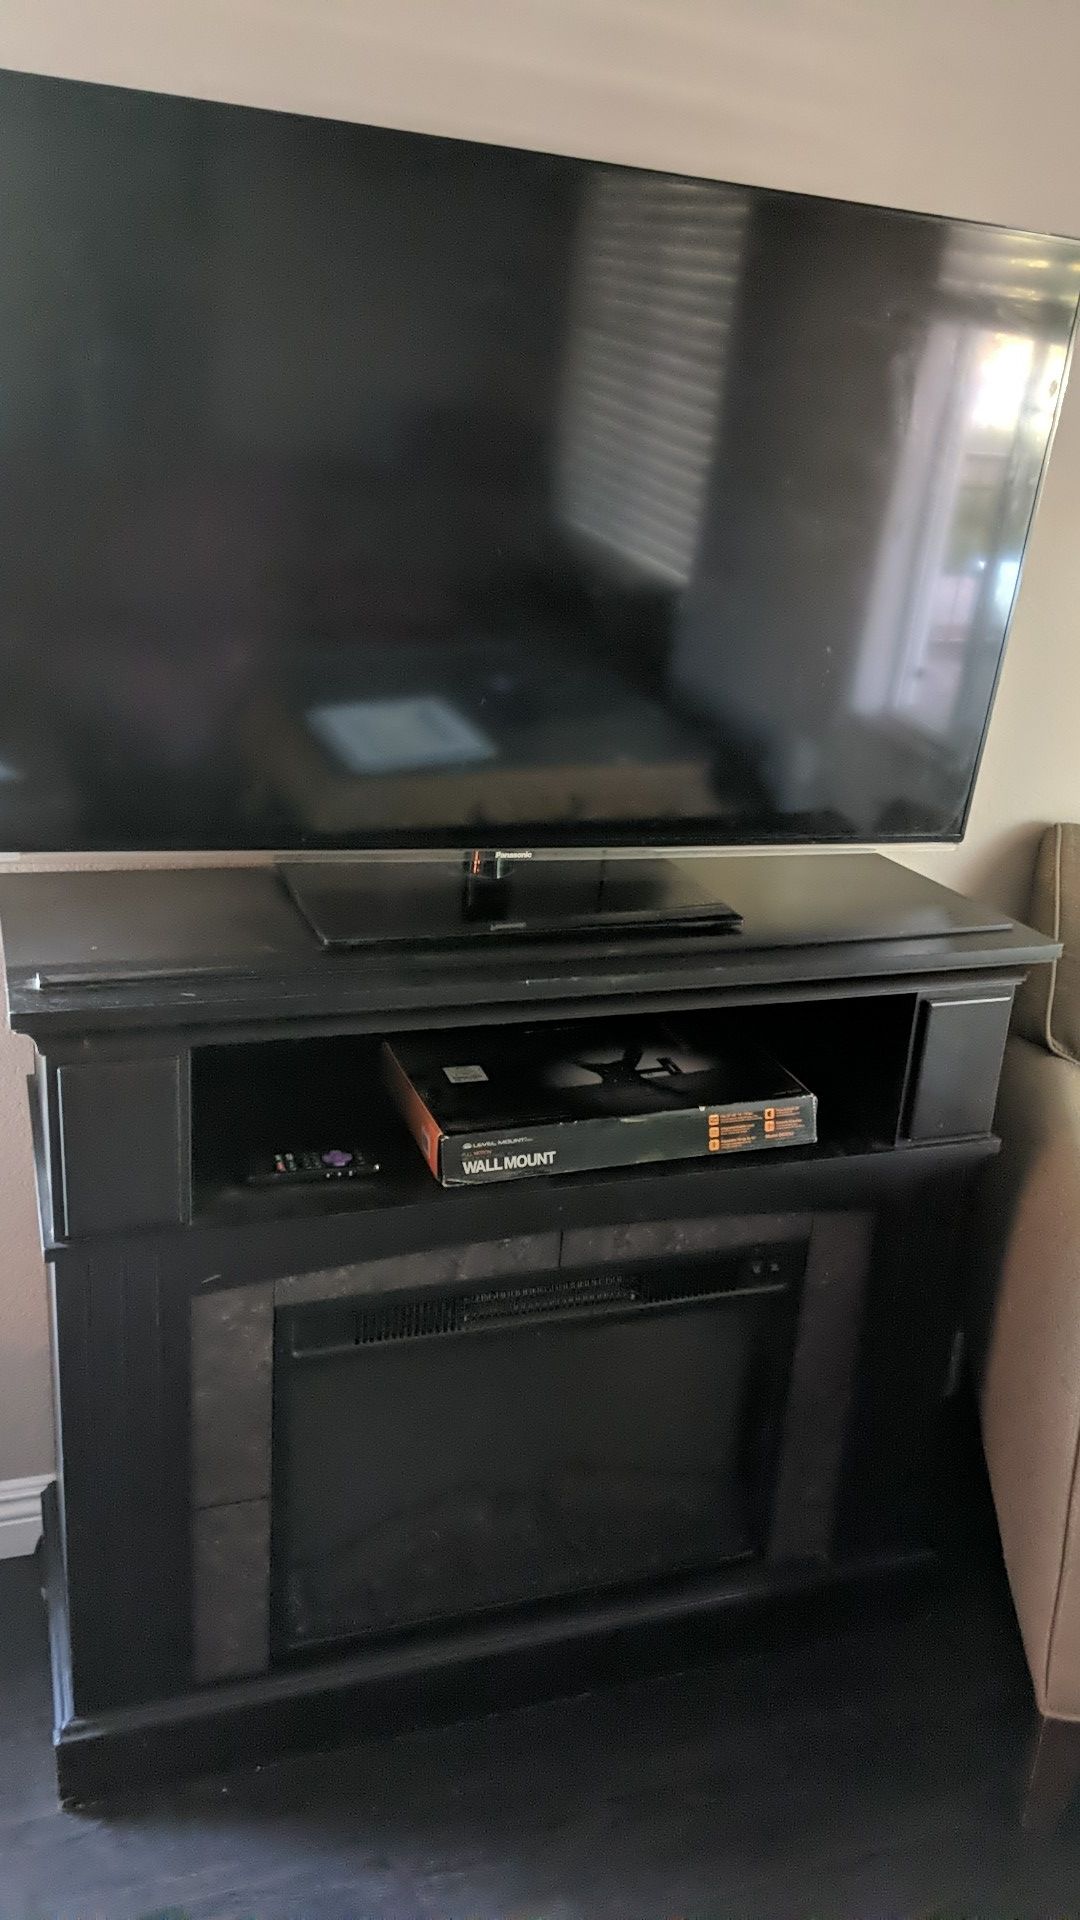 50" 1080p smart t.v., wall mount, and fireplace